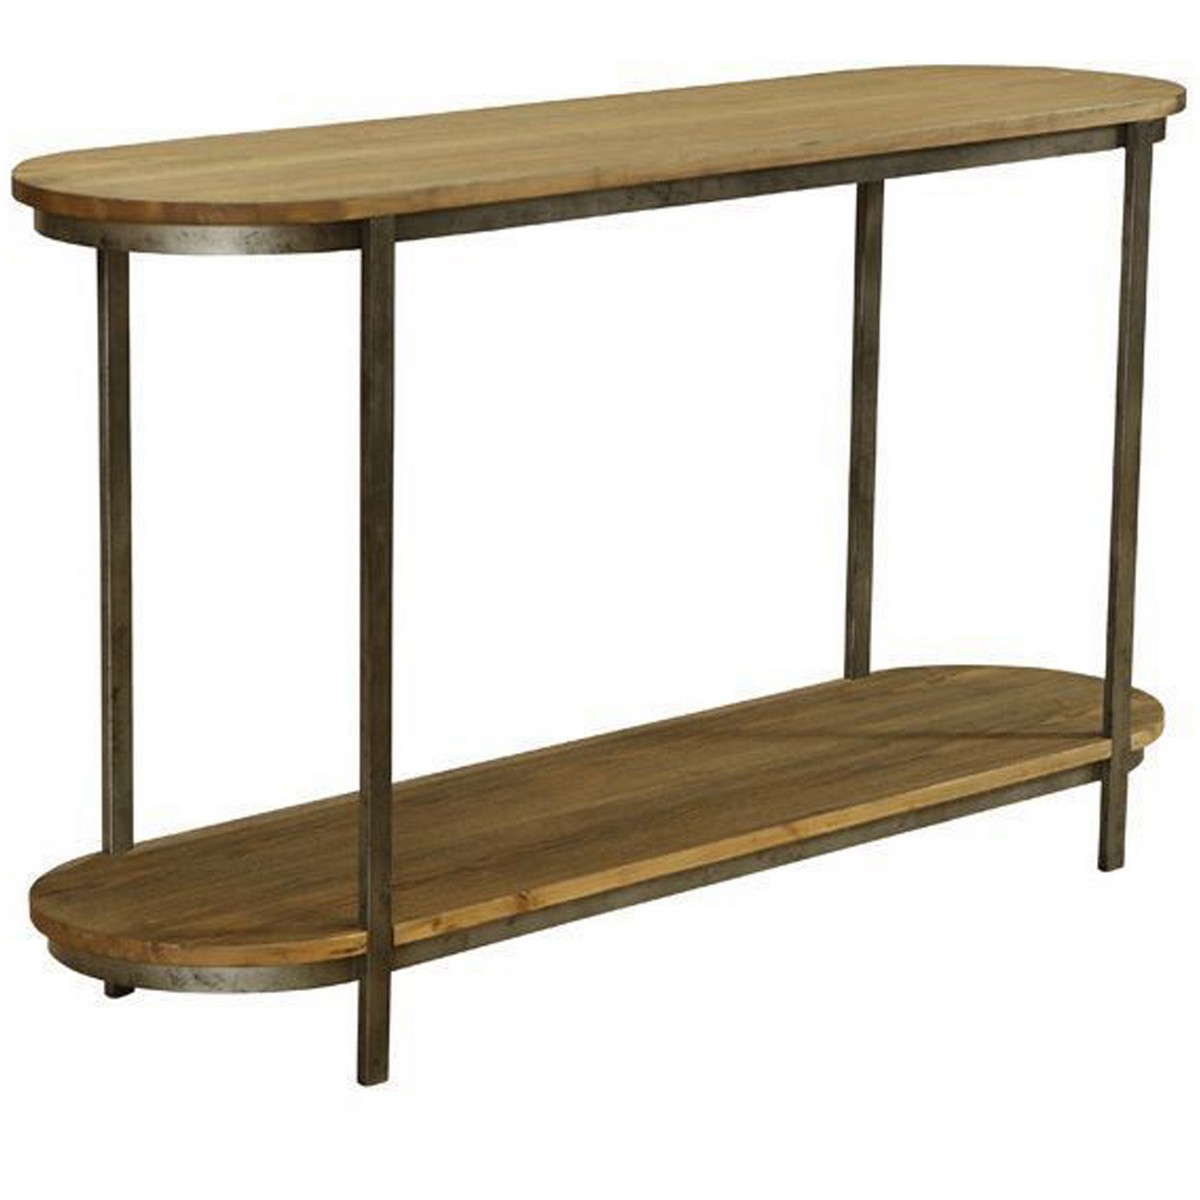 Armen Living Barstow Pine Top Console Table With Gunmetal Frame